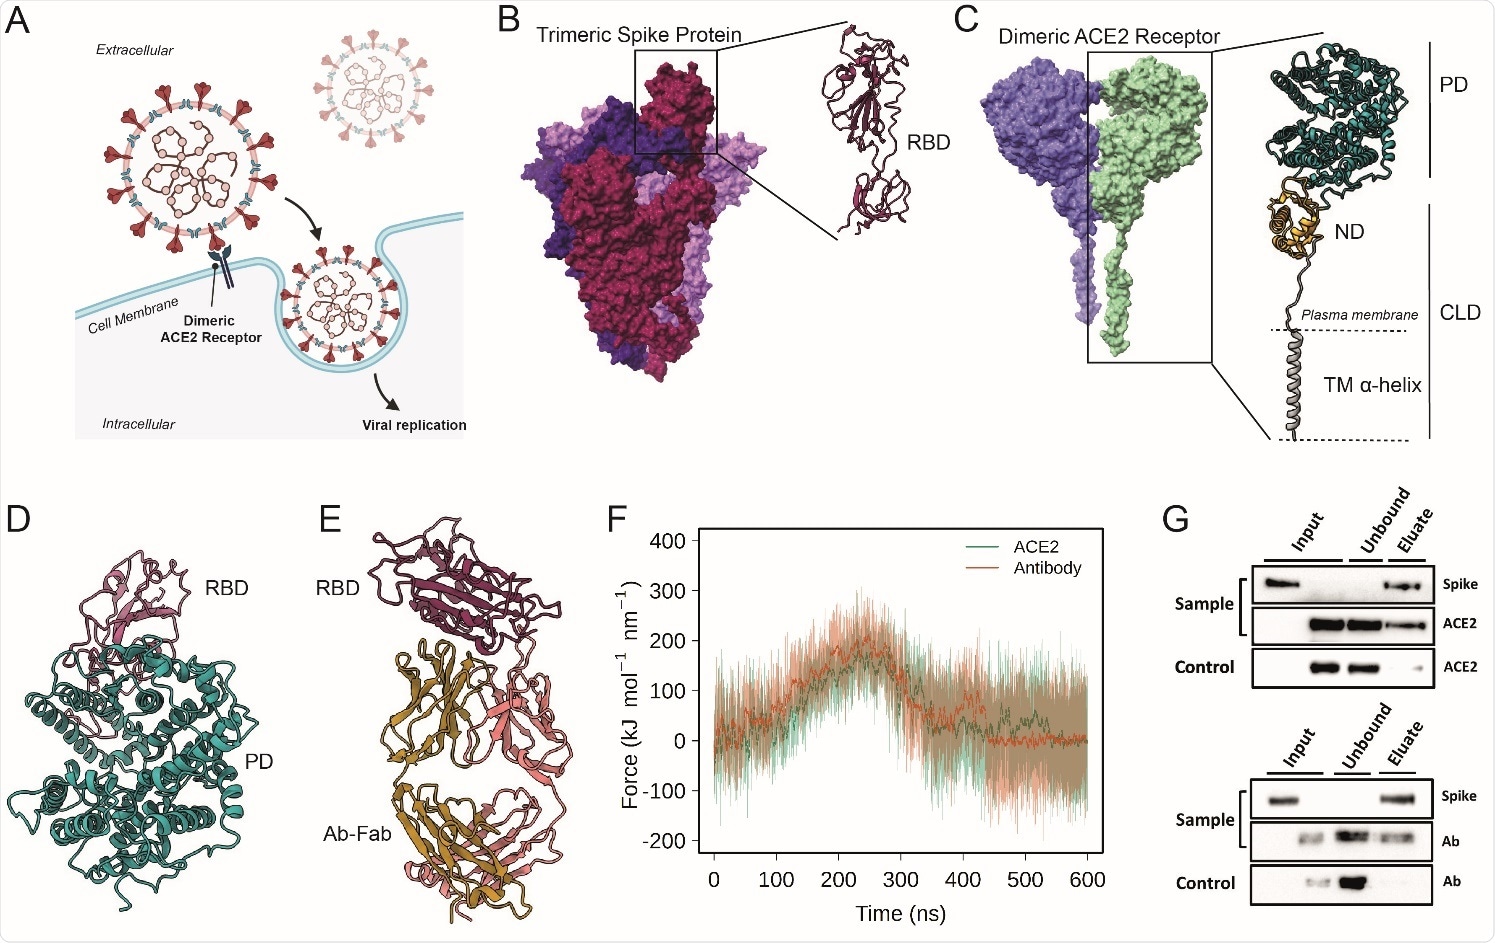 Probing the interactions of ACE2 and Antibodies with Spike (A) Schematic representation of ACE2-mediated host cell entry mechanism. (B) Cryo-EM structure of soluble trimeric Spike protein (the three monomers have different colors). A zoomed in view of the RBD is shown. (C) Cryo-EM structure of dimeric ACE2 receptor (the two monomers are colored differently). The two subunits of a monomer are reported: Peptidase domain (PD) and Collectrin-like domain (CLD) that is composed by neck domain (ND) and transmembrane helix (TM). (D) Peptidase Domain of the ACE2 receptor bound to the RBD of the SARSCoV- 2 Spike protein. (E) Antibody CR3022, bound to the SARS-CoV-2 spike protein RBD. (F) Force profiles from the steered MD simulations of RBD unbinding from the ACE2 receptor (orange) and Ab-CR3022 (green) (G) Pull-down assay of Spike and ACE2 (upper), and Spike and Ab Anti-Spike (lower). Control is represented by the same experiment excluding the Spike protein (bait) from the system. The binding of Spike with ACE2 or anti-Spike were monitored by Western blot analysis.